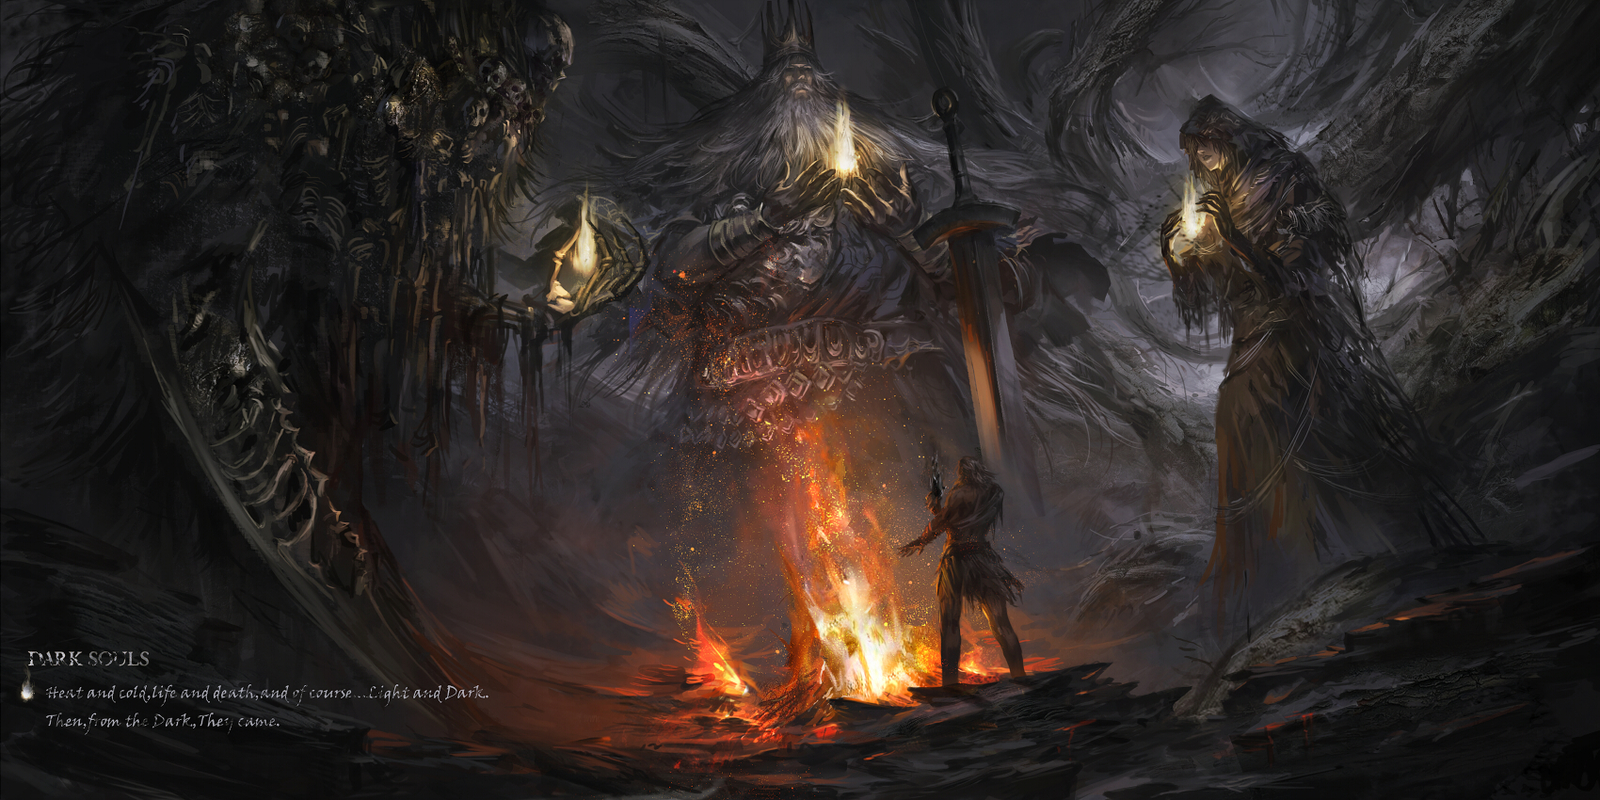 Overlords - Dark souls, STU DTS, Manus Father of the Abyss, , , Gravelord nito, Art, Gwyn Lord of Cinder